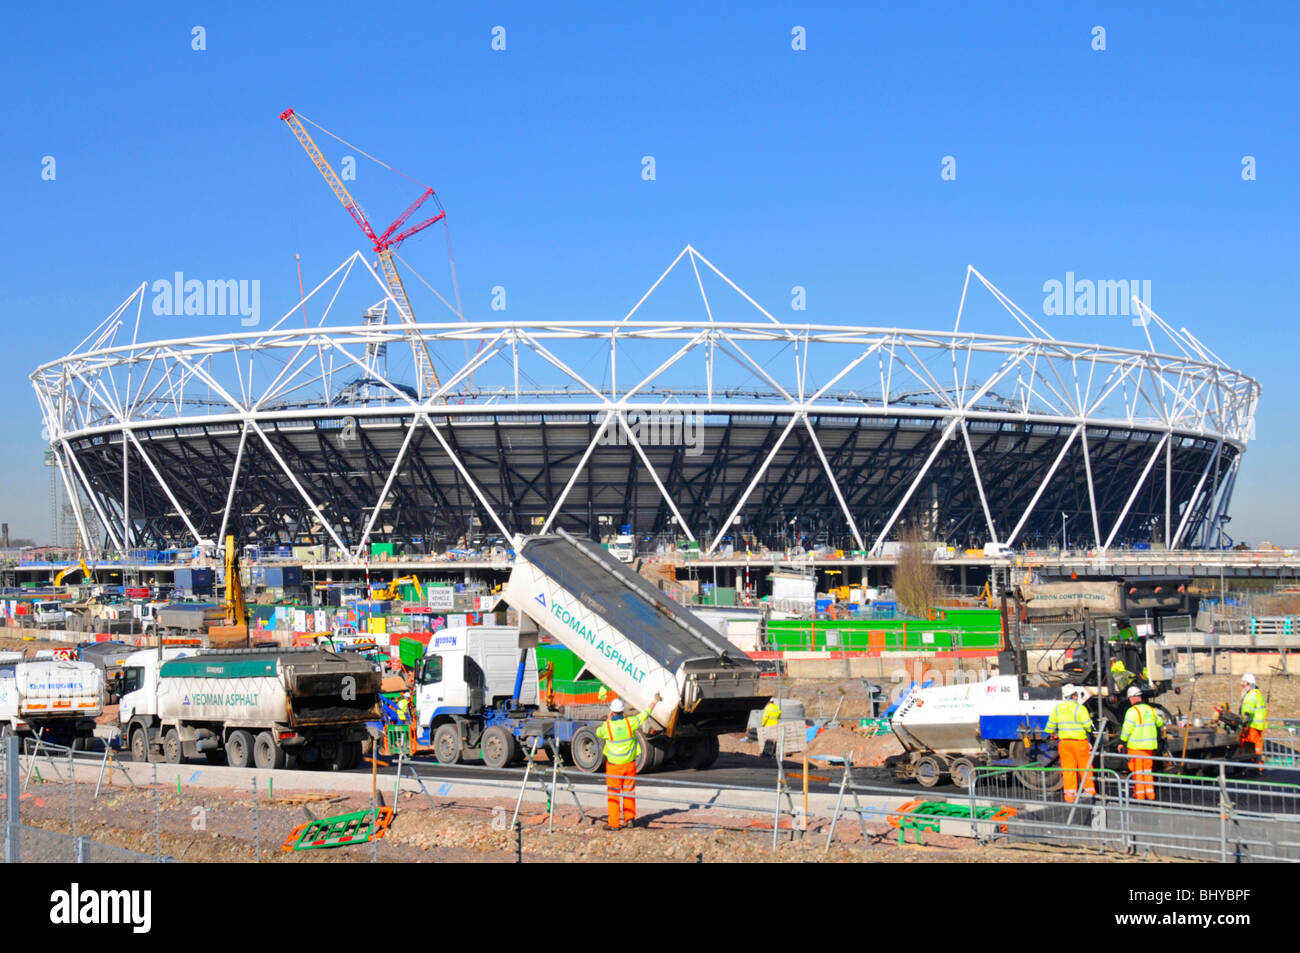 Crane at Stratford 2012 Olympic & Paralympic Games sports stadium building industry construction site work in progress Newham East London England UK Stock Photo